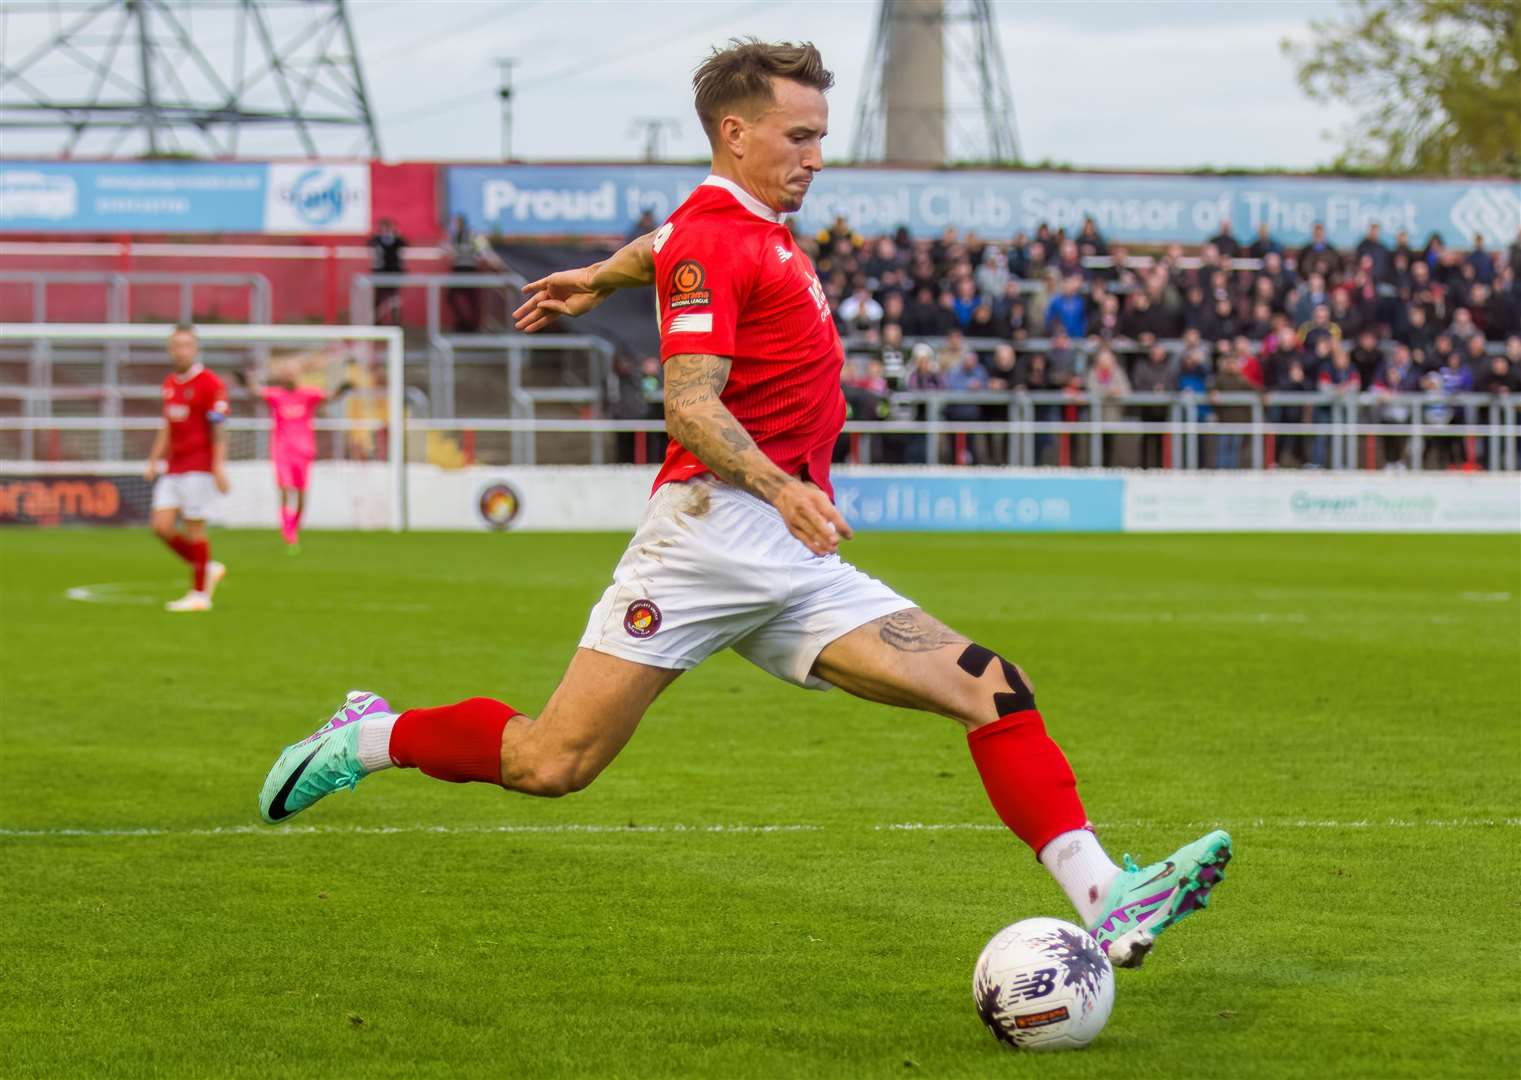 Ben Chapman - led the Fleet to victory against AFC Fylde on Saturday. Picture: Ed Miller/EUFC